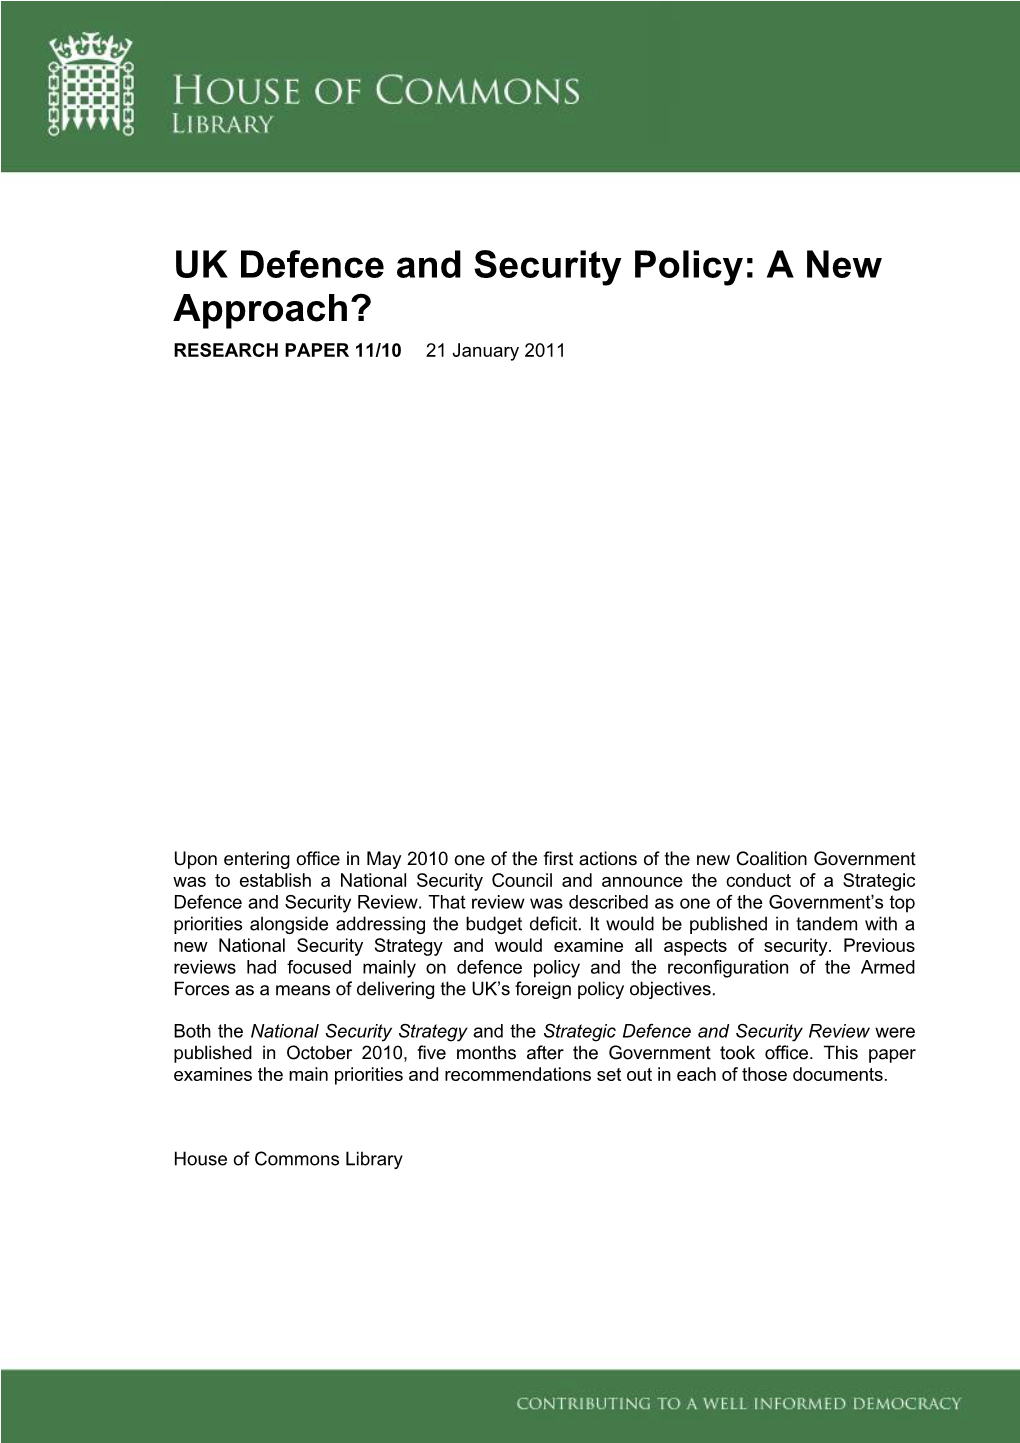 UK Defence and Security Policy: a New Approach? RESEARCH PAPER 11/10 21 January 2011